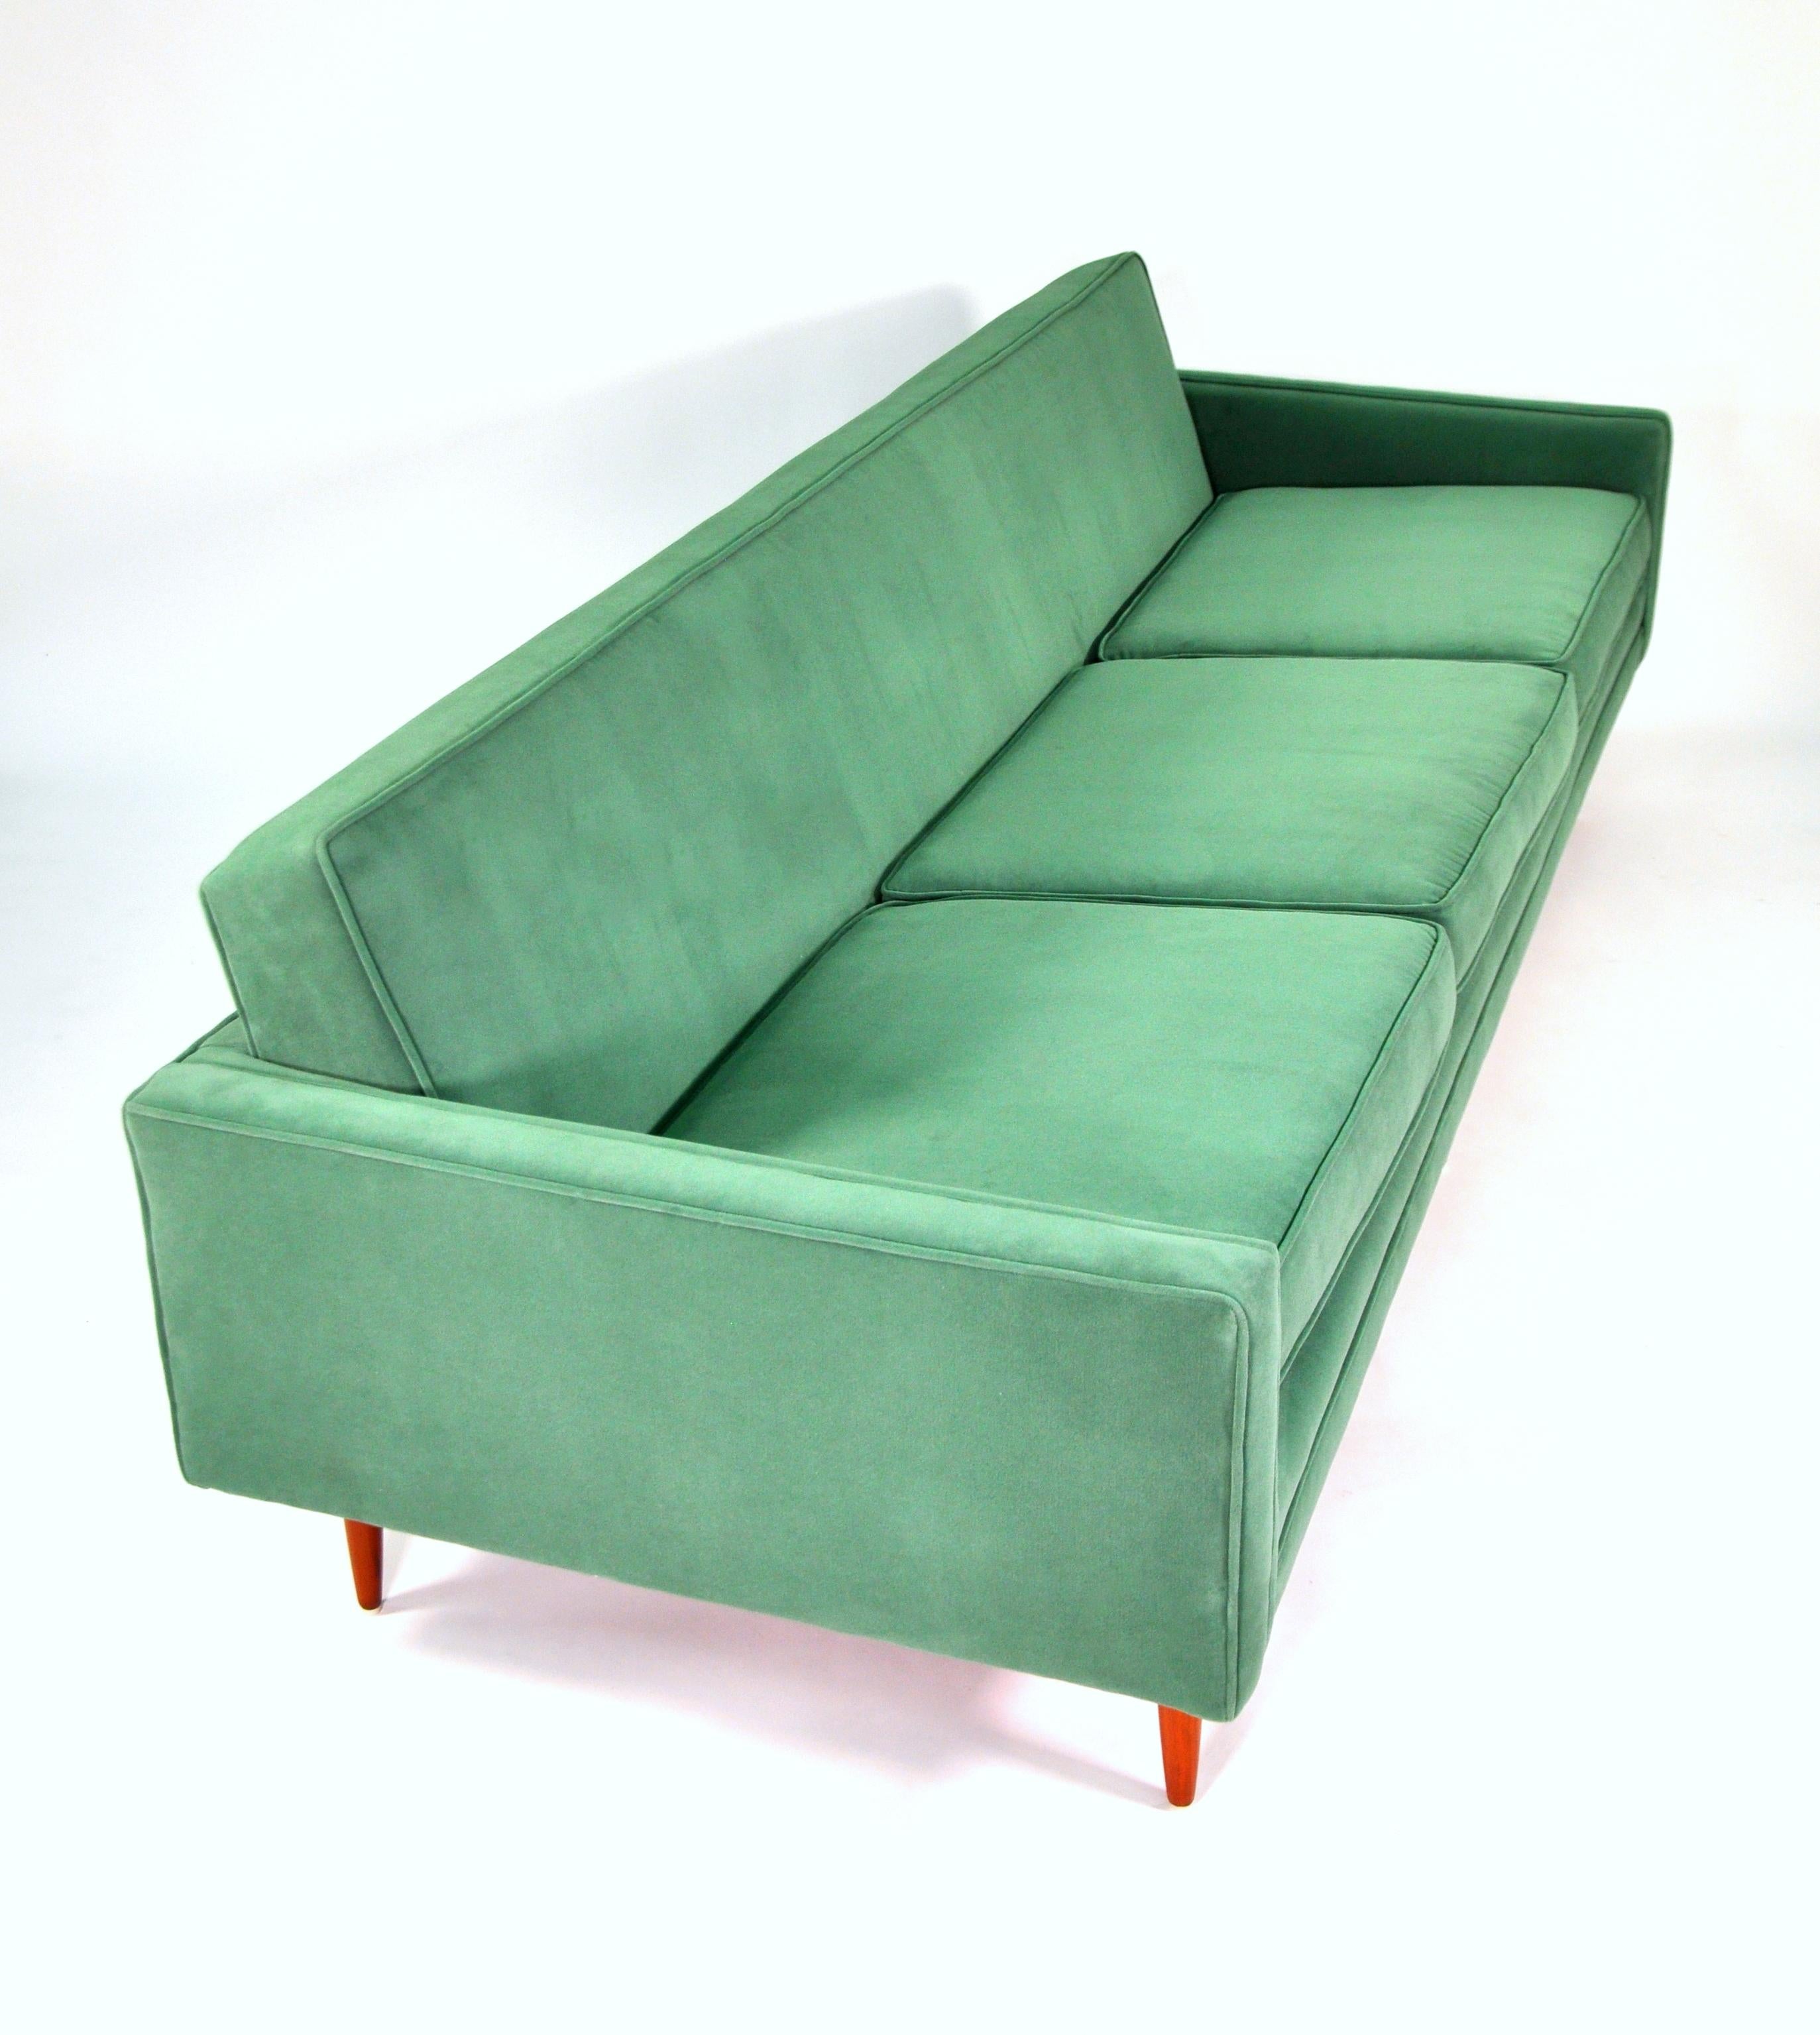 A Mid-Century Modern couch with walnut legs, dating from the 1950s and newly reupholstered in a light emerald green cotton velvet. The vintage three-seat sofa, designed by Milo Baughman for Thayer Coggin, features loose cushions and round tapered